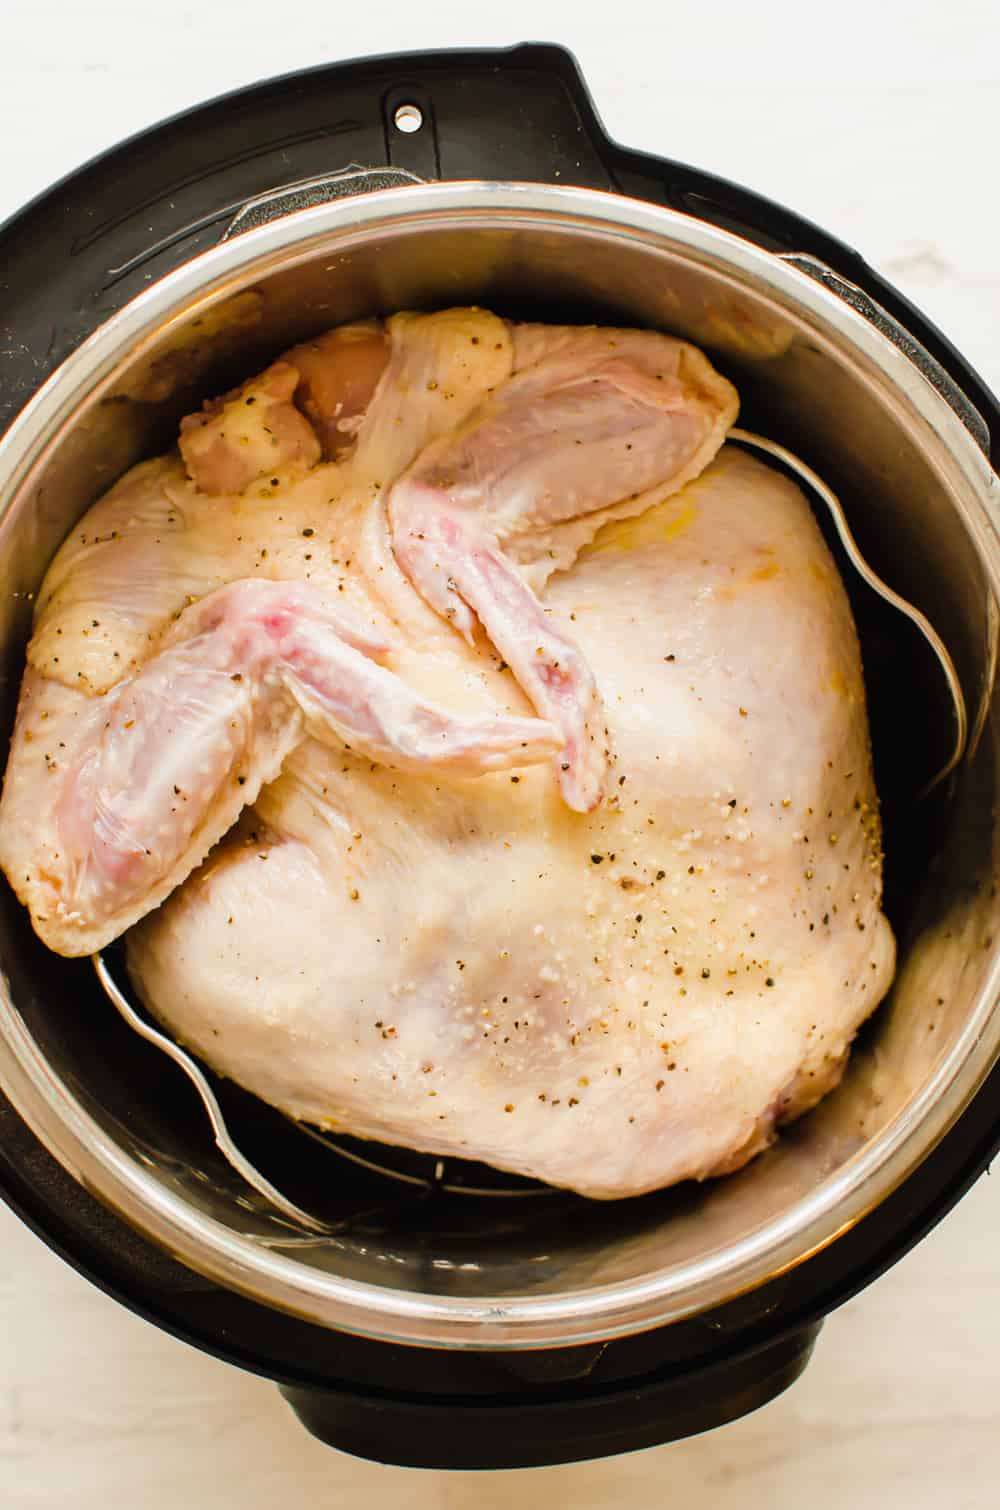 A whole, raw chicken in an instant Pot with seasonings on it.